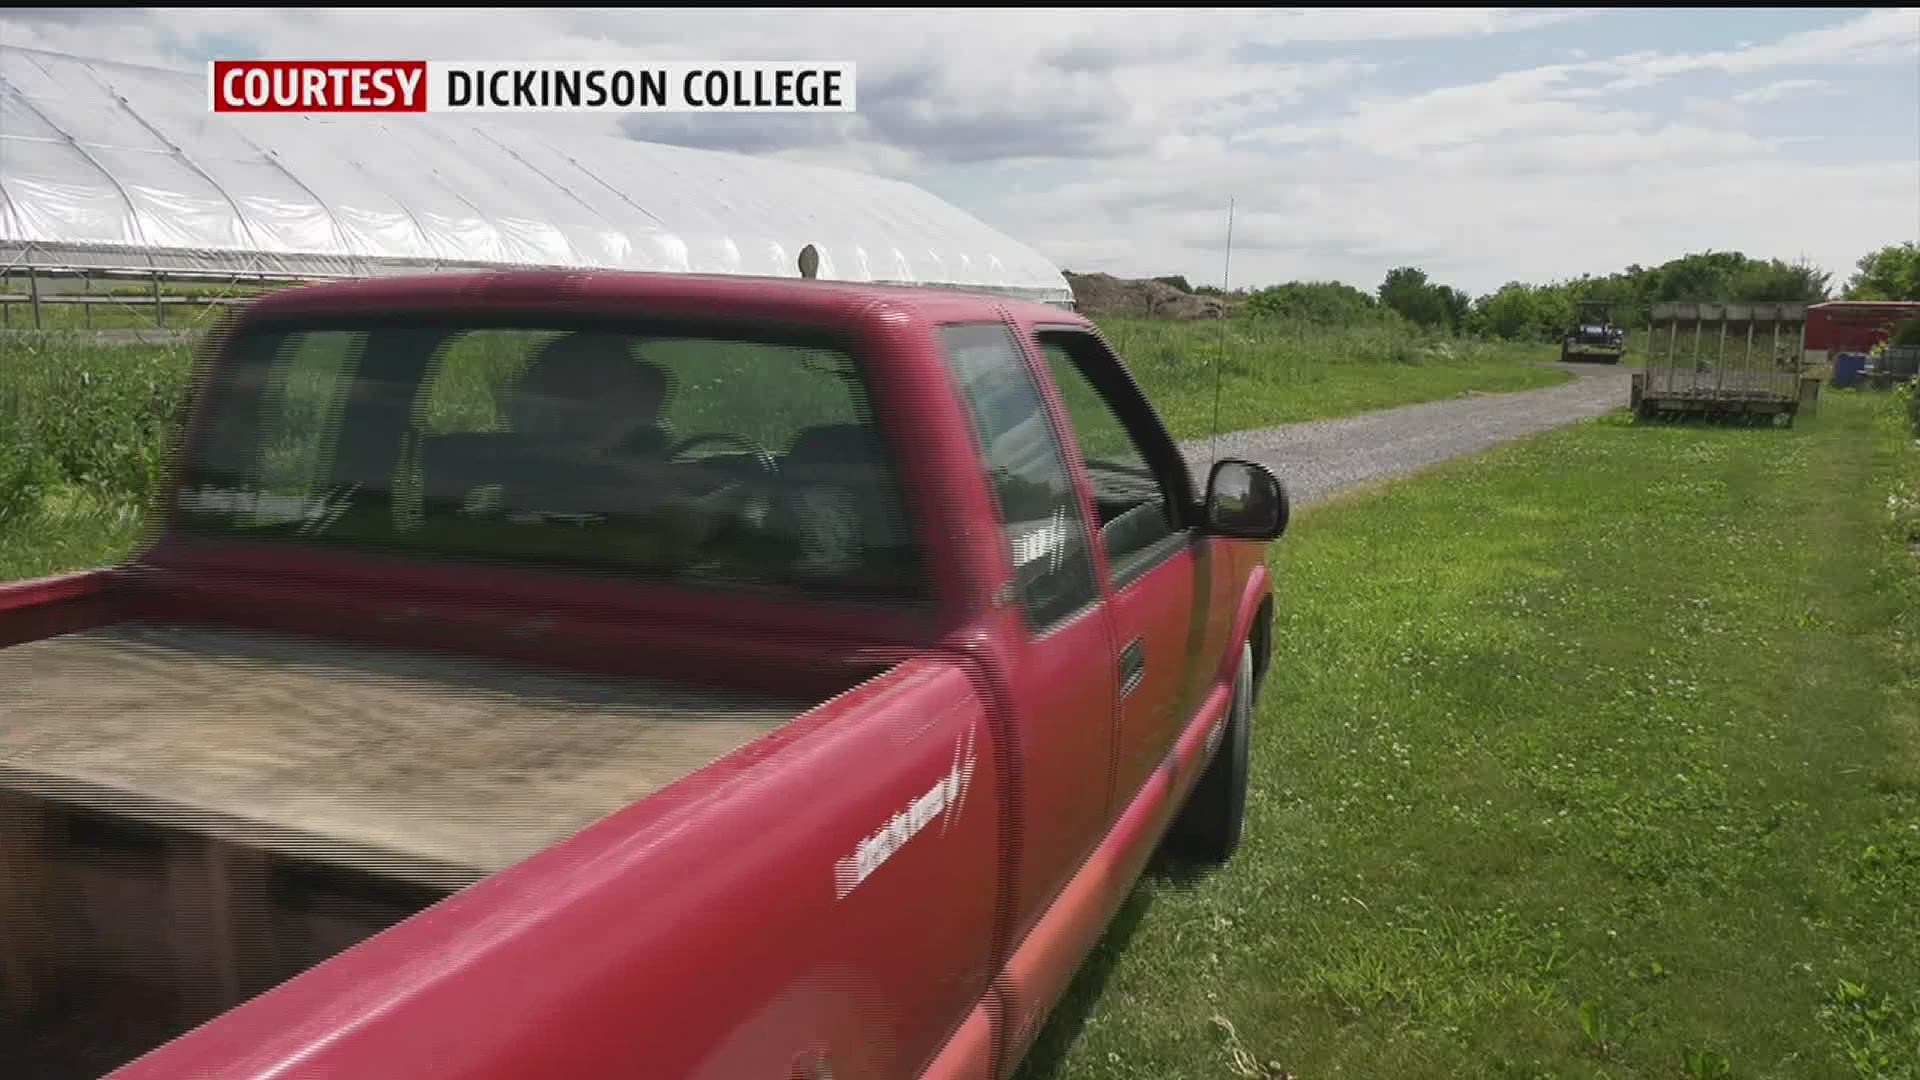 Dickinson College is working to reduce its carbon footprint by using electric-powered vehicles on its farm